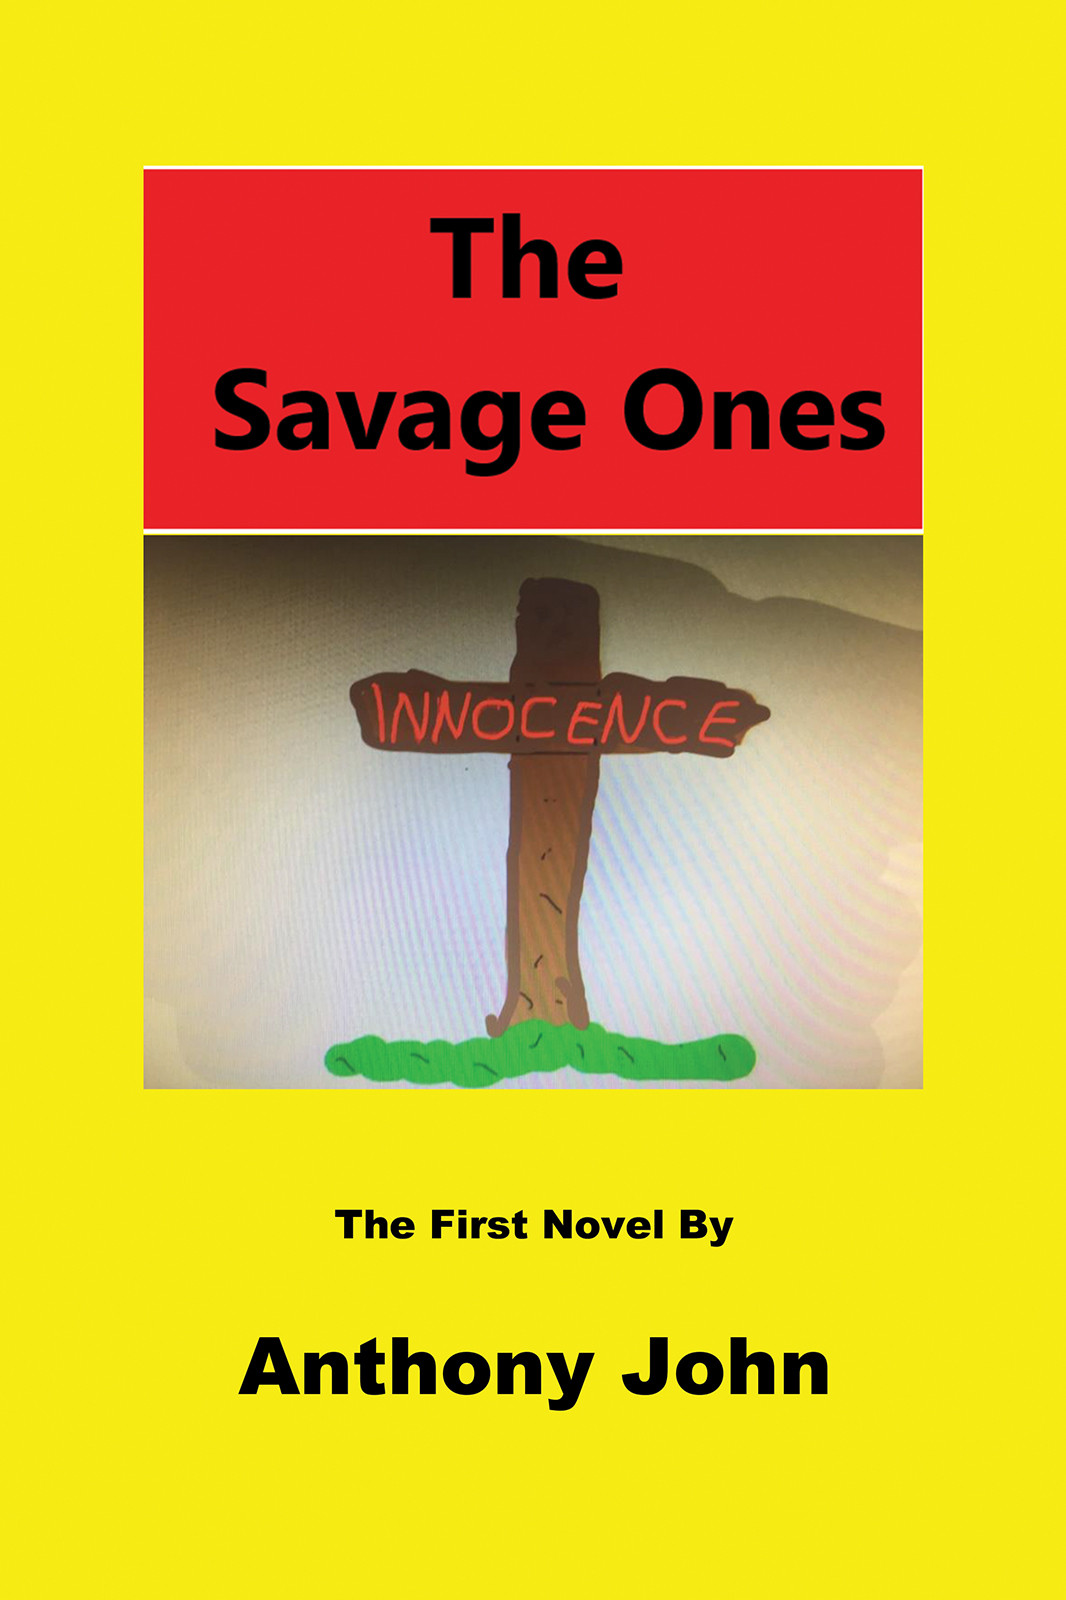 The Savage Ones